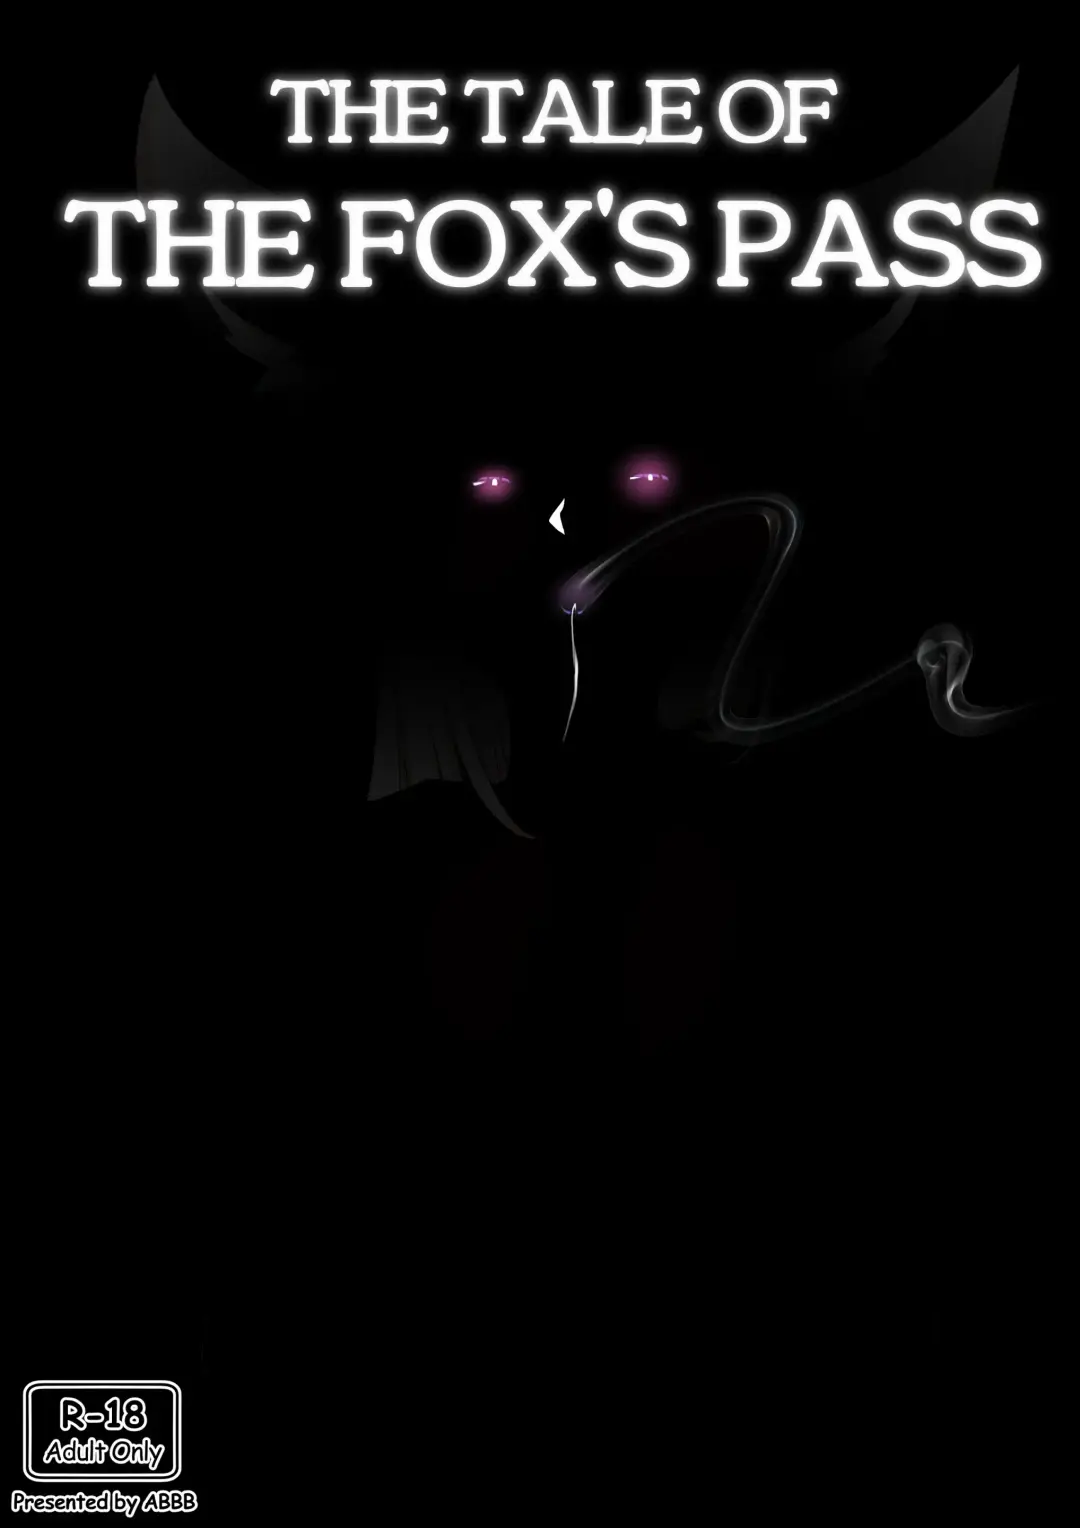 [Abbb] The tale of the fox's pass Fhentai.net - Page 27